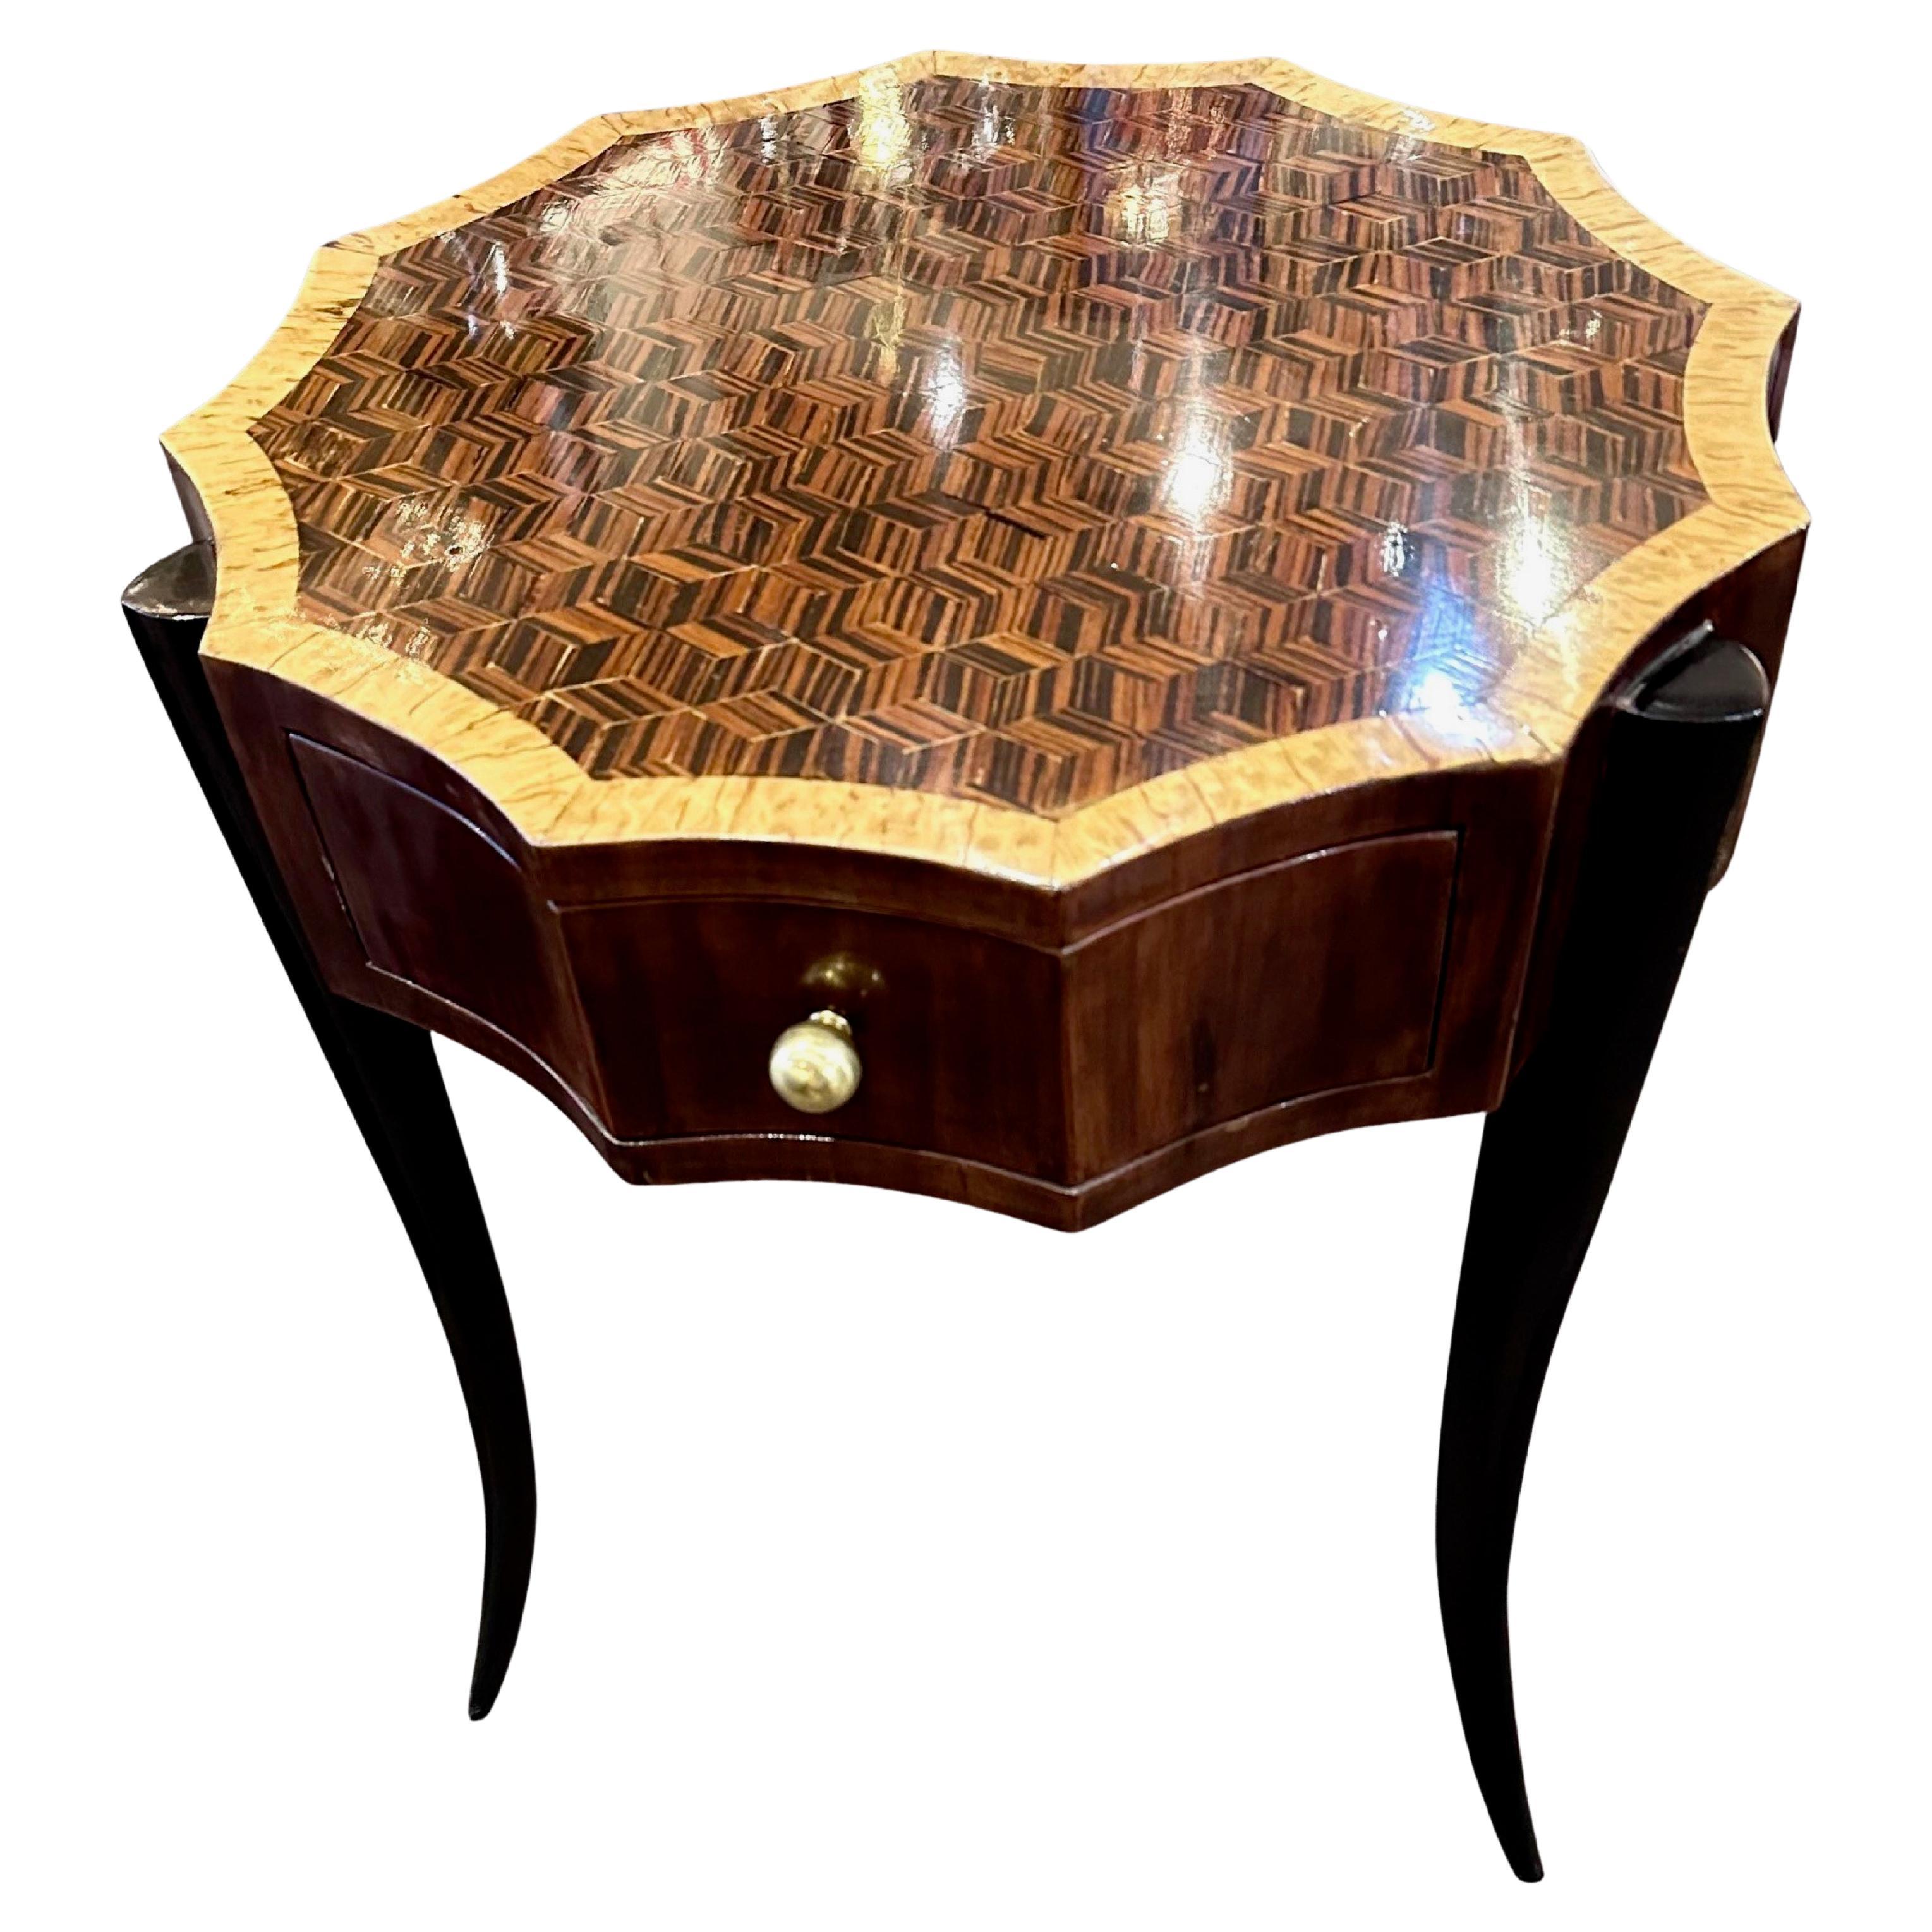 Art Deco Style 12-Sided Faceted Unique Marquetry Table For Sale